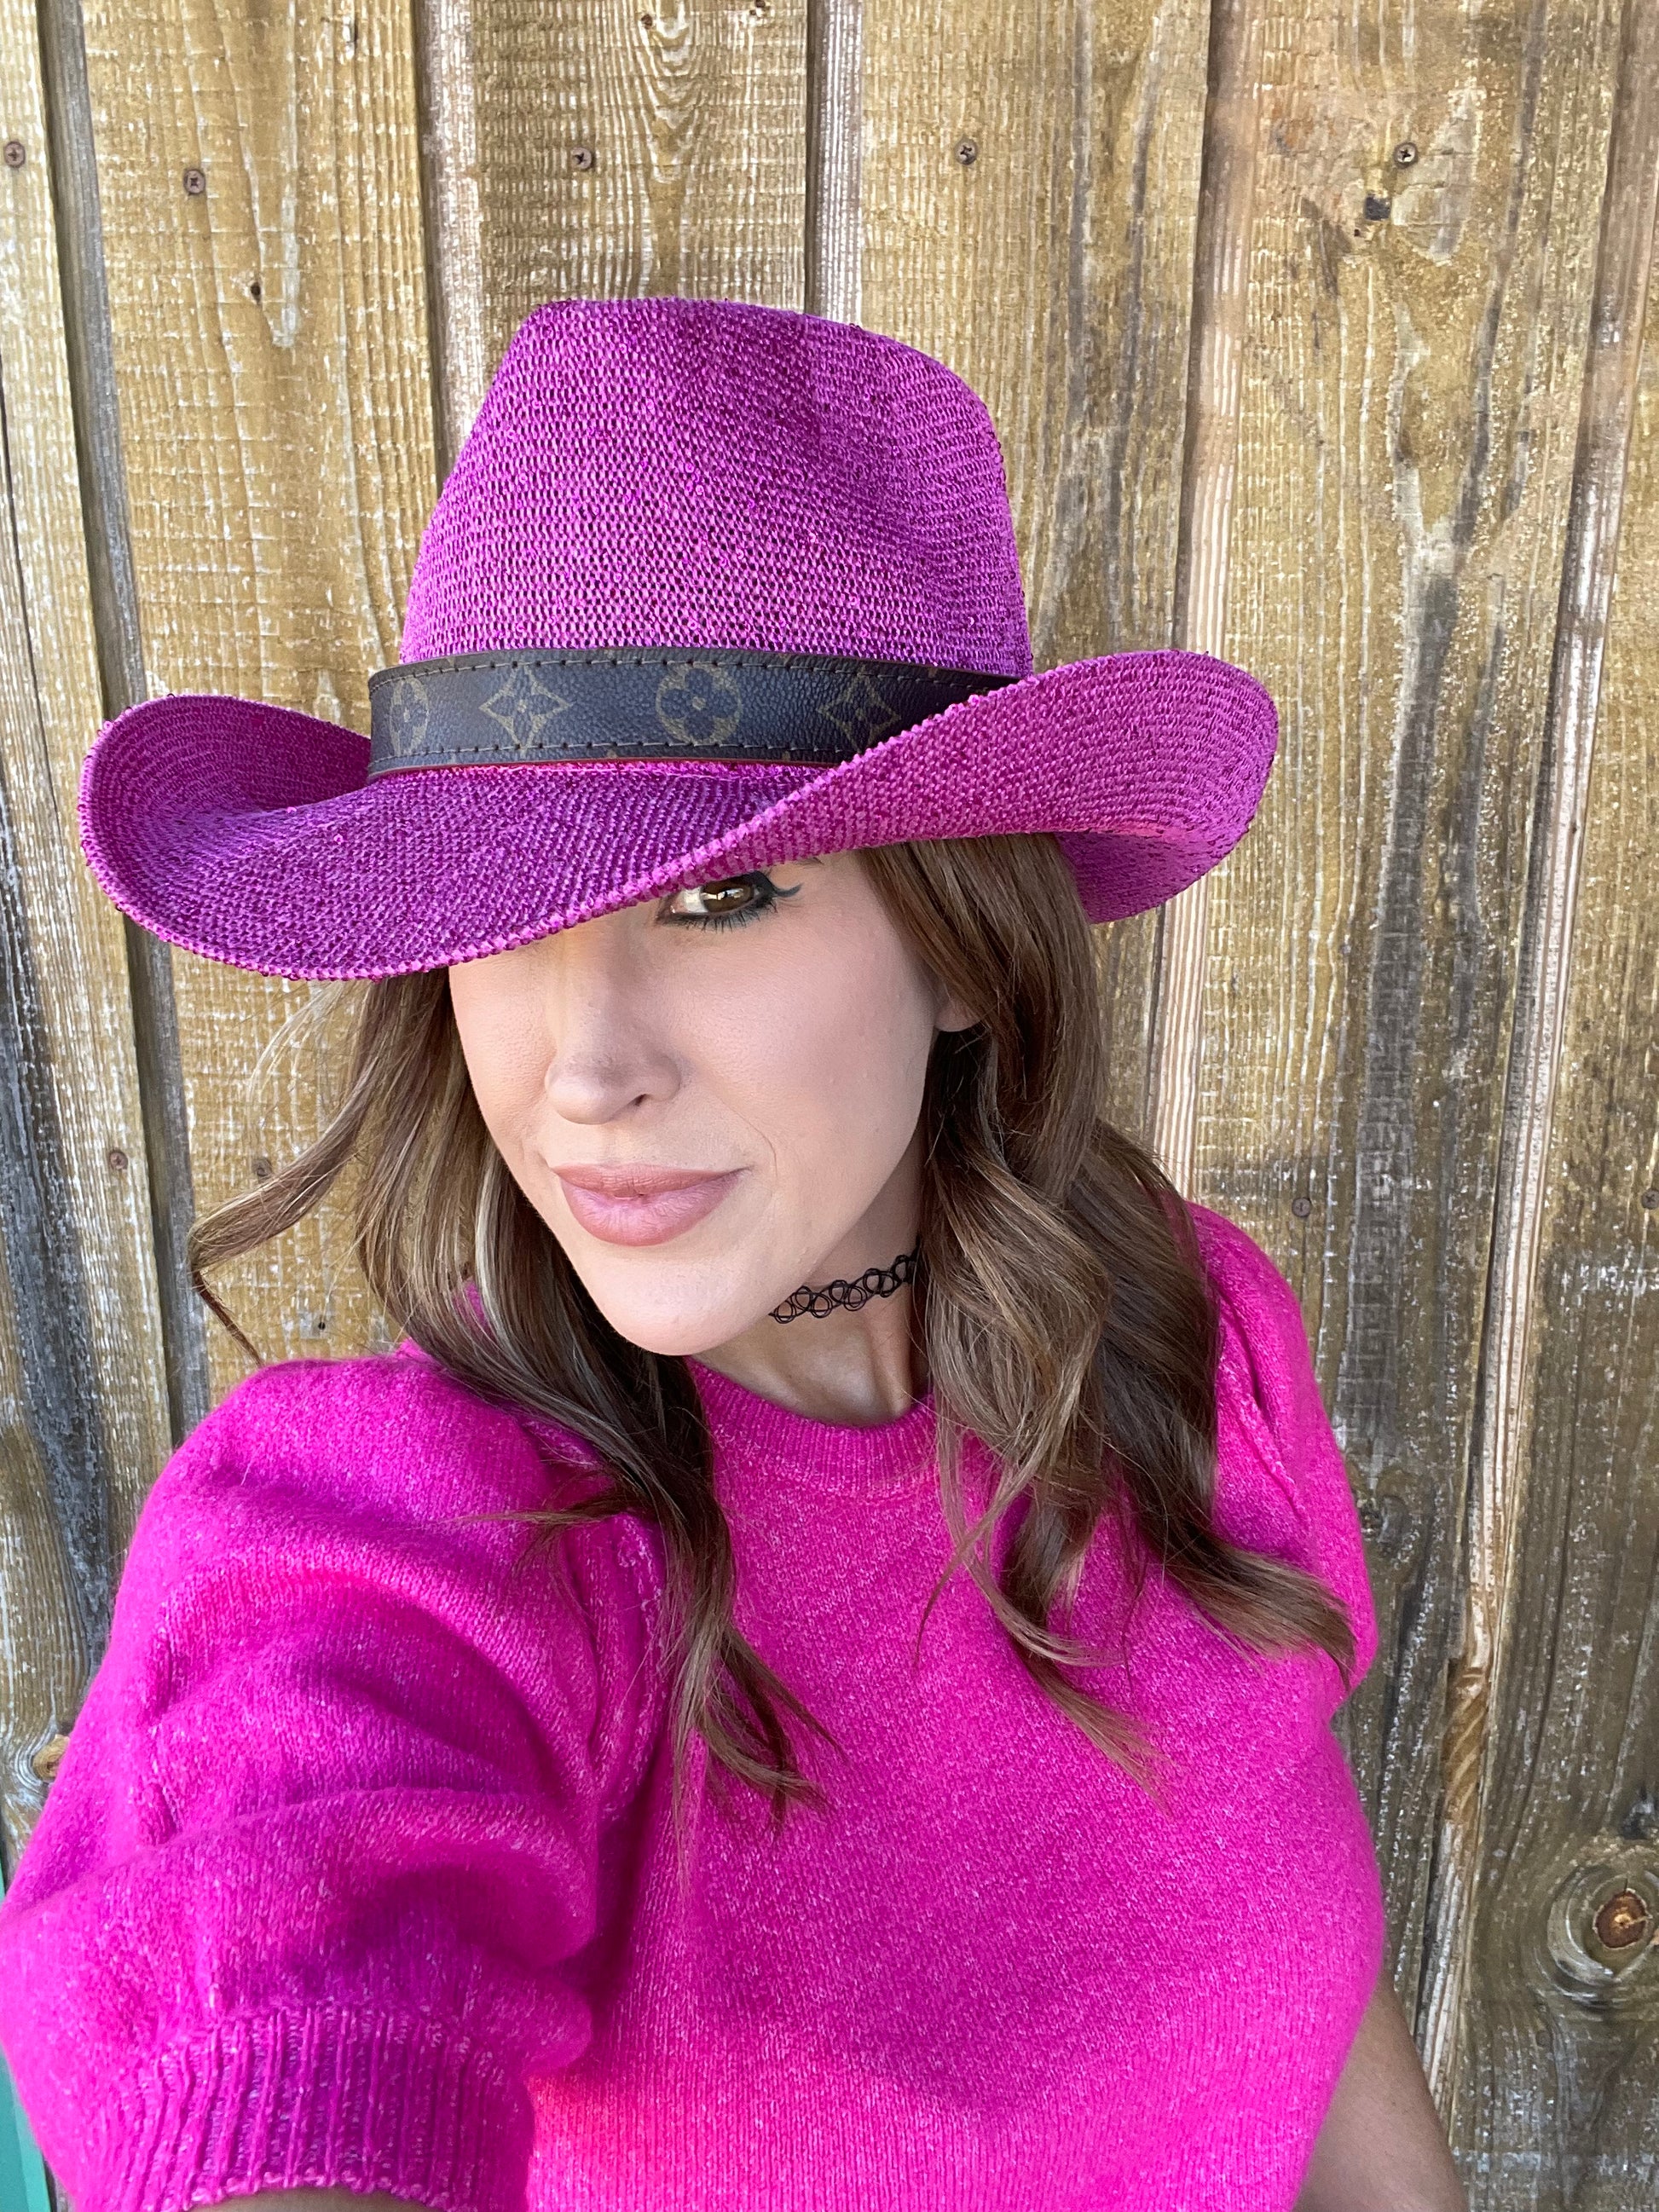 Pink Sparkle Cowgirl Hat with flourish hat belt UPF 50+ sun protection - Patches Of Upcycling